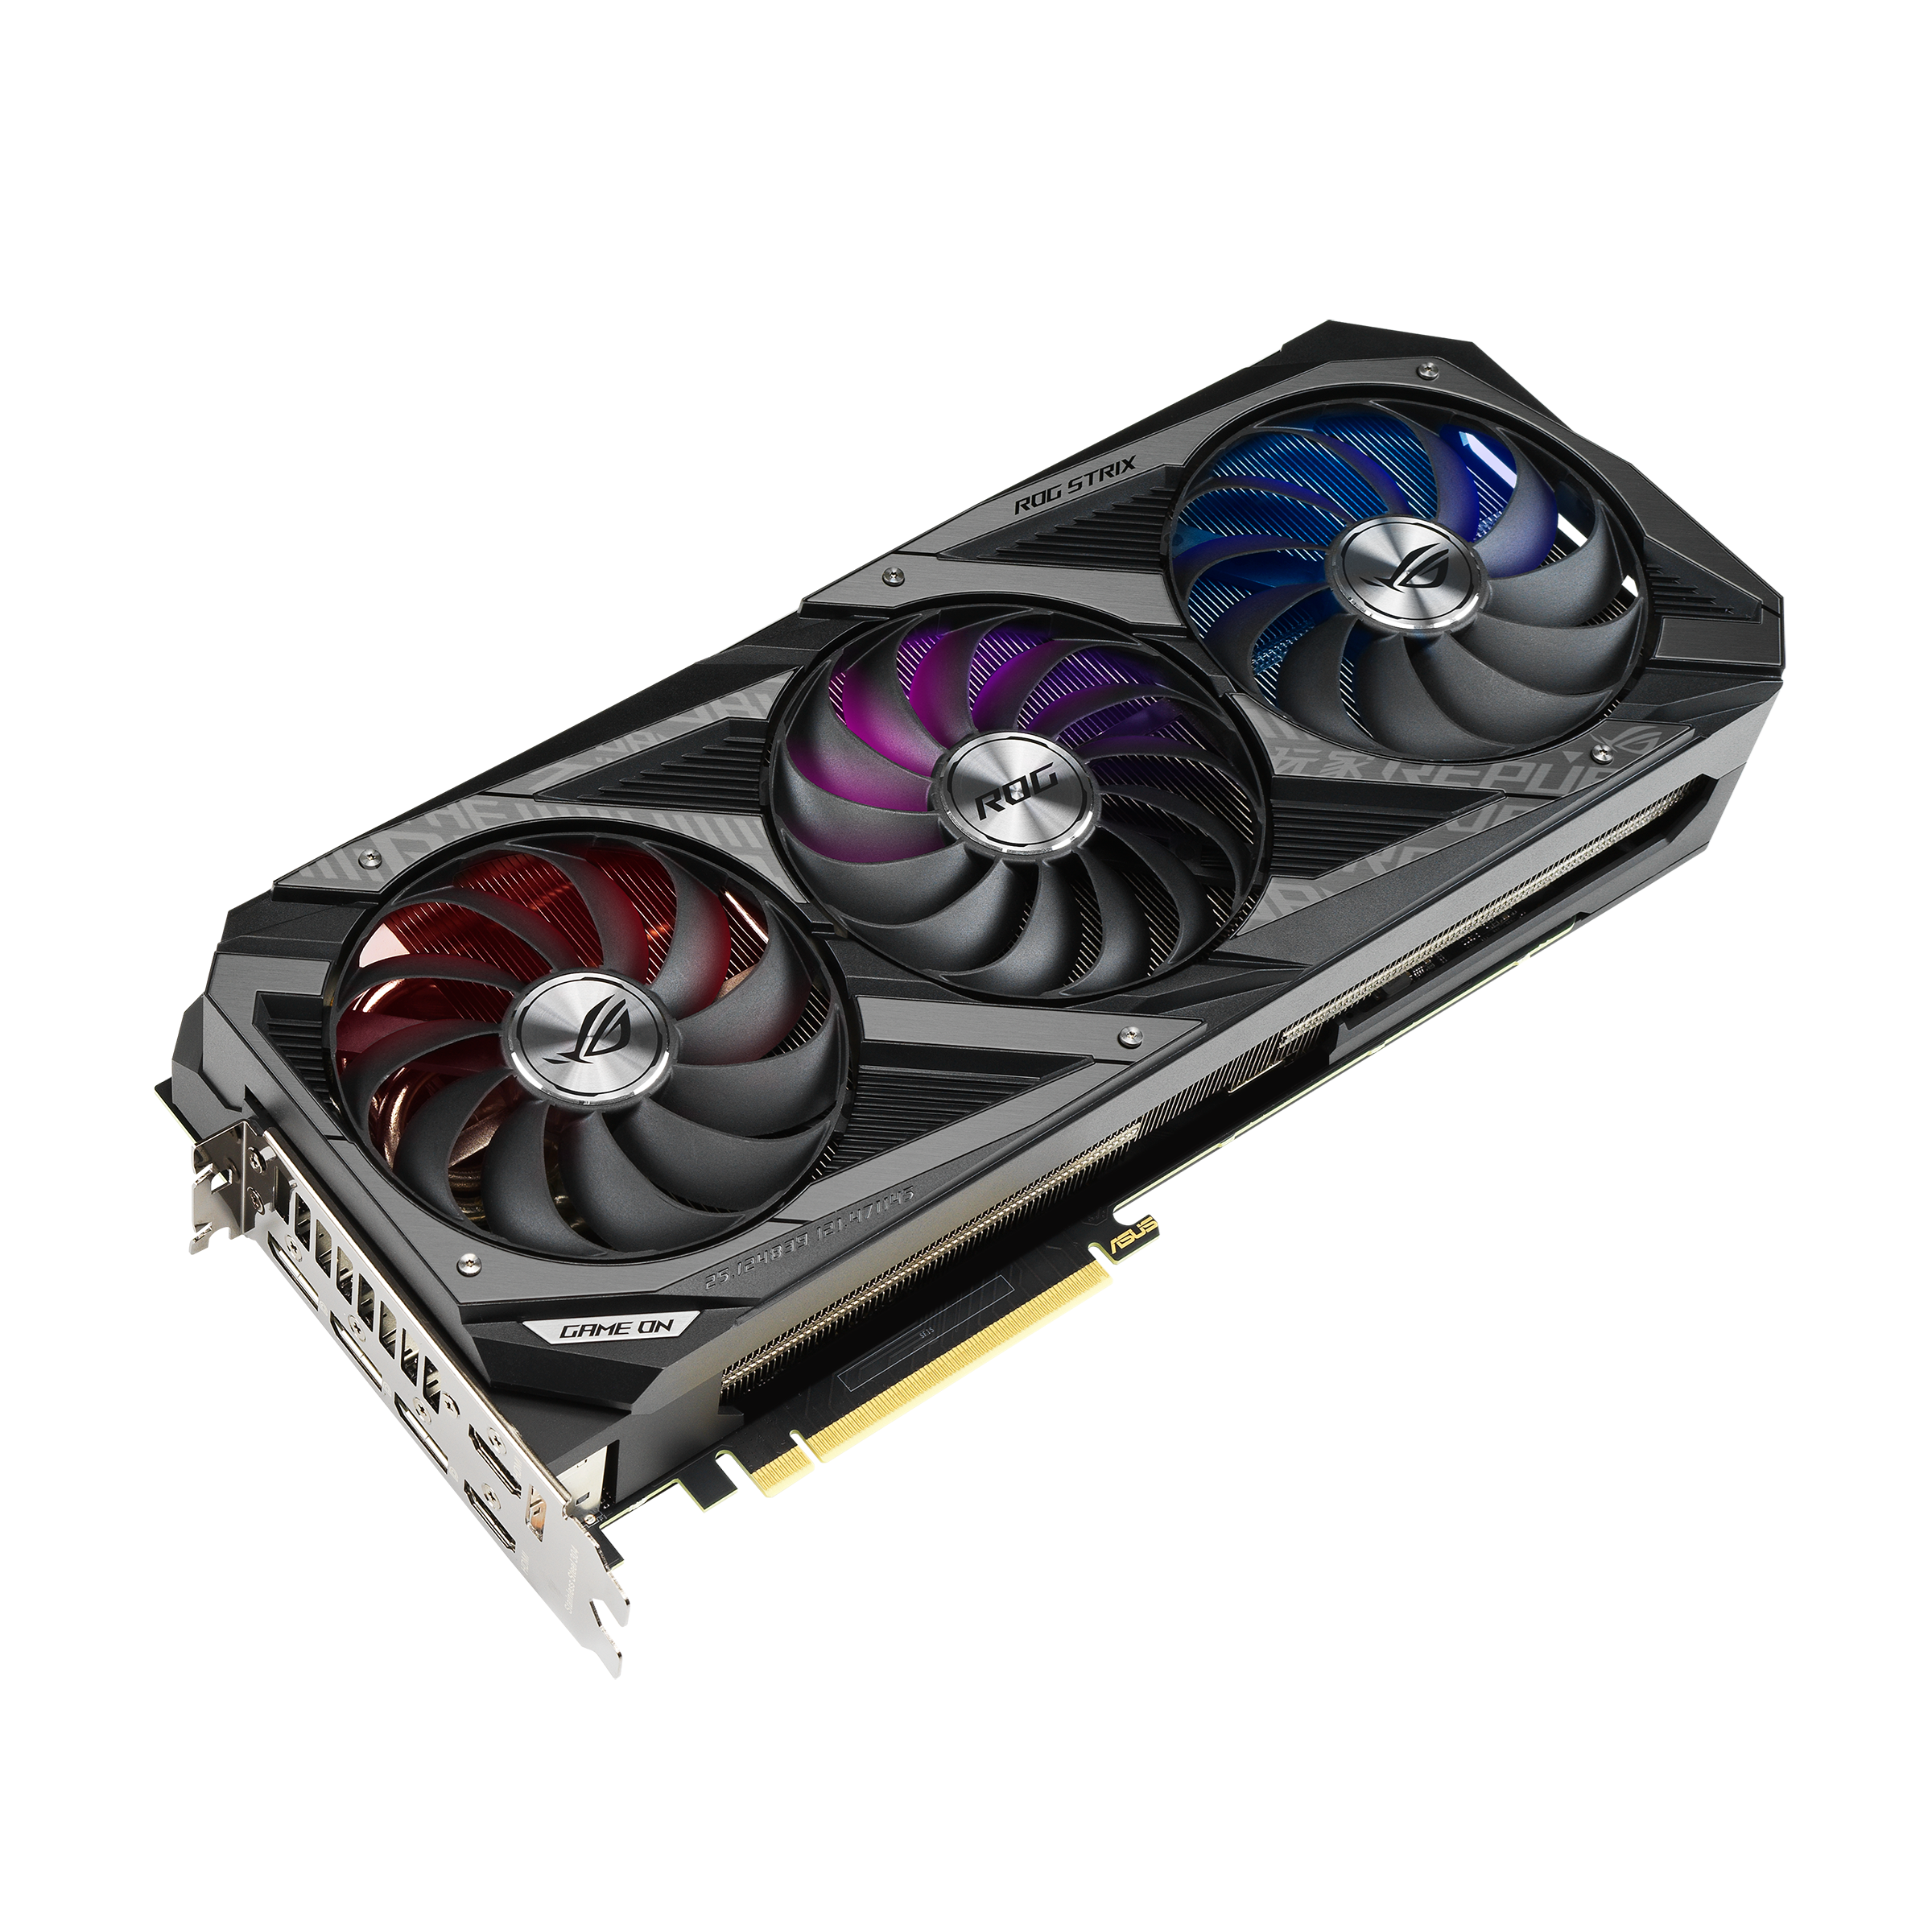 Cards - All series｜ASUS USA